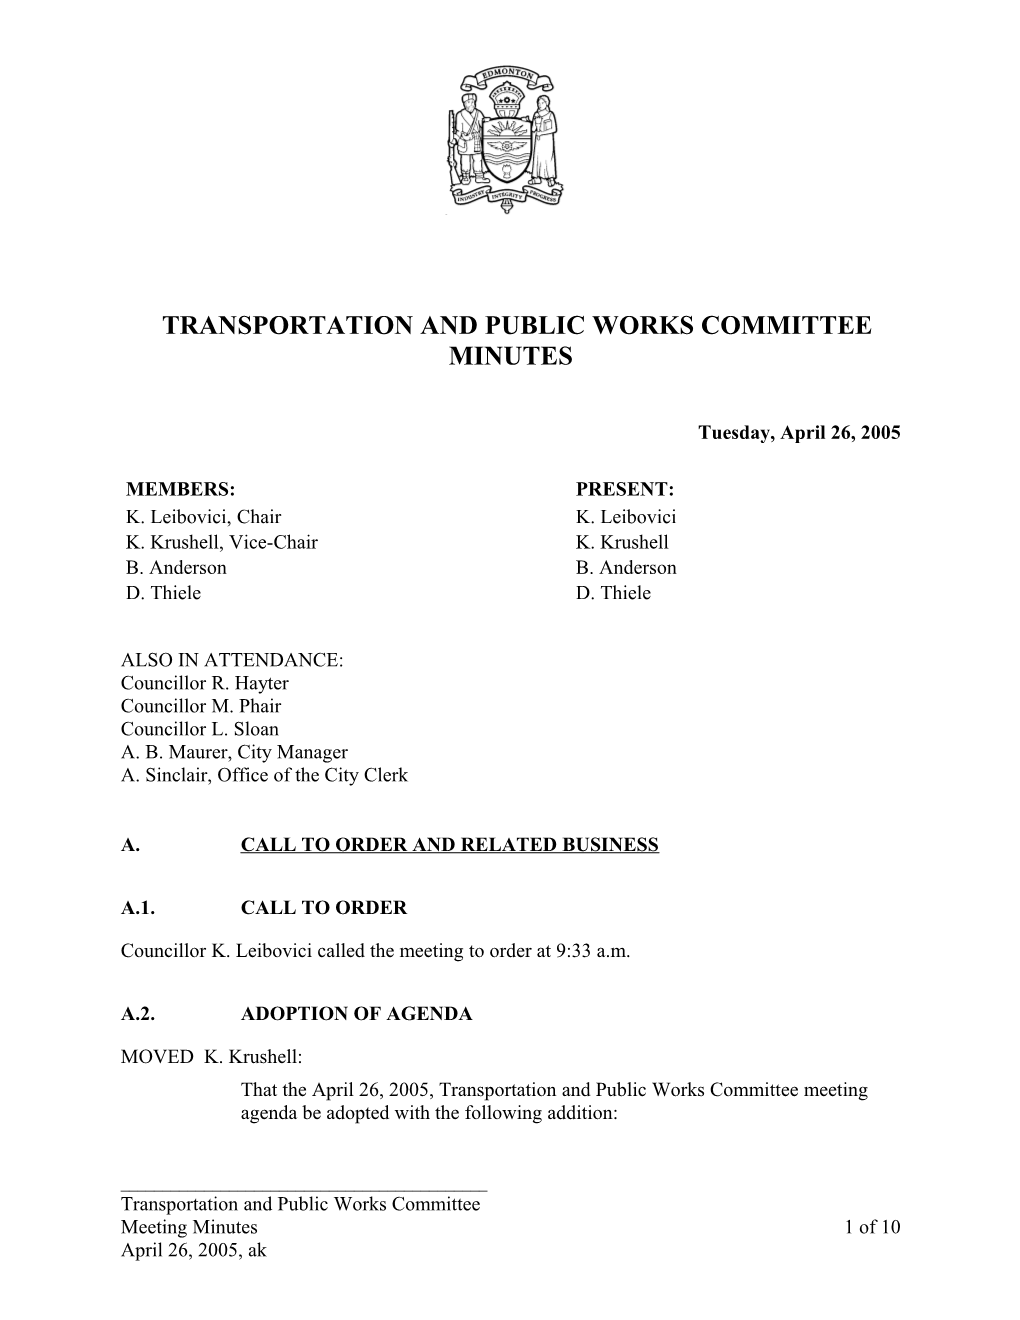 Minutes for Transportation and Public Works Committee April 26, 2005 Meeting